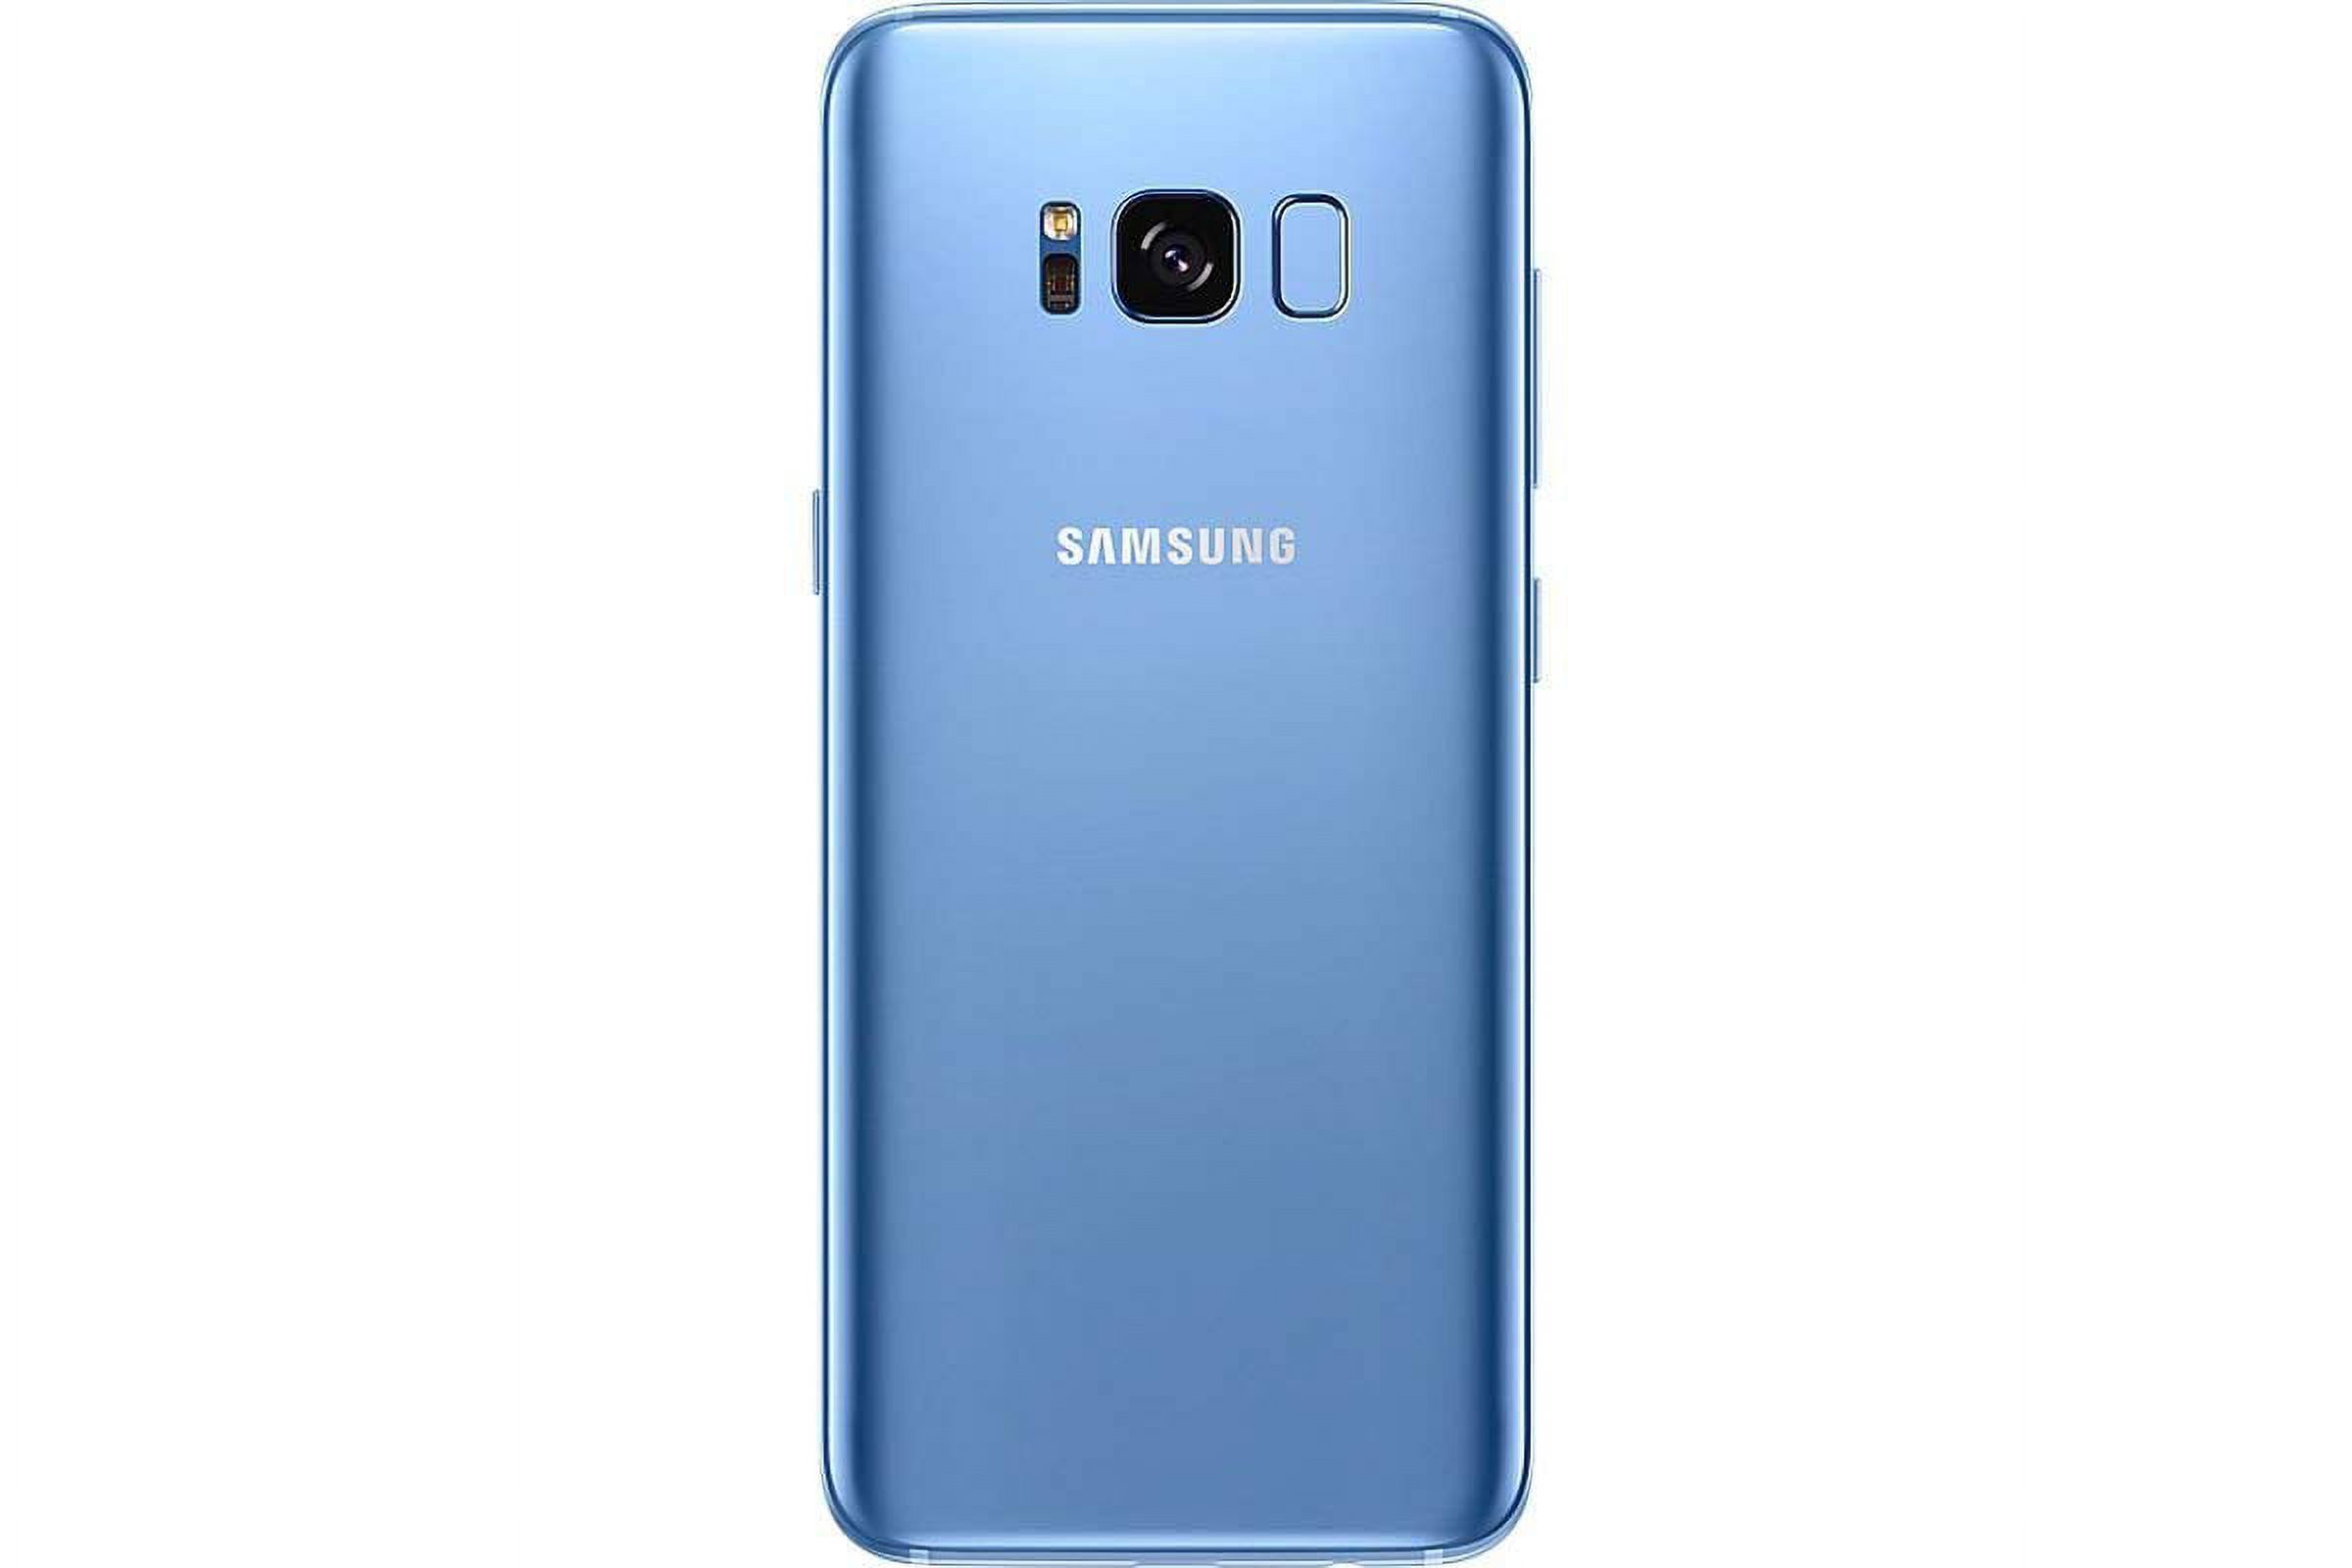 Used Samsung Galaxy S8 - 64GB - Midnight Black - Fully Unlocked - Verizon / T-Mobile / Global - Android Smartphone - Grade A (LCD Shadow) - image 3 of 3